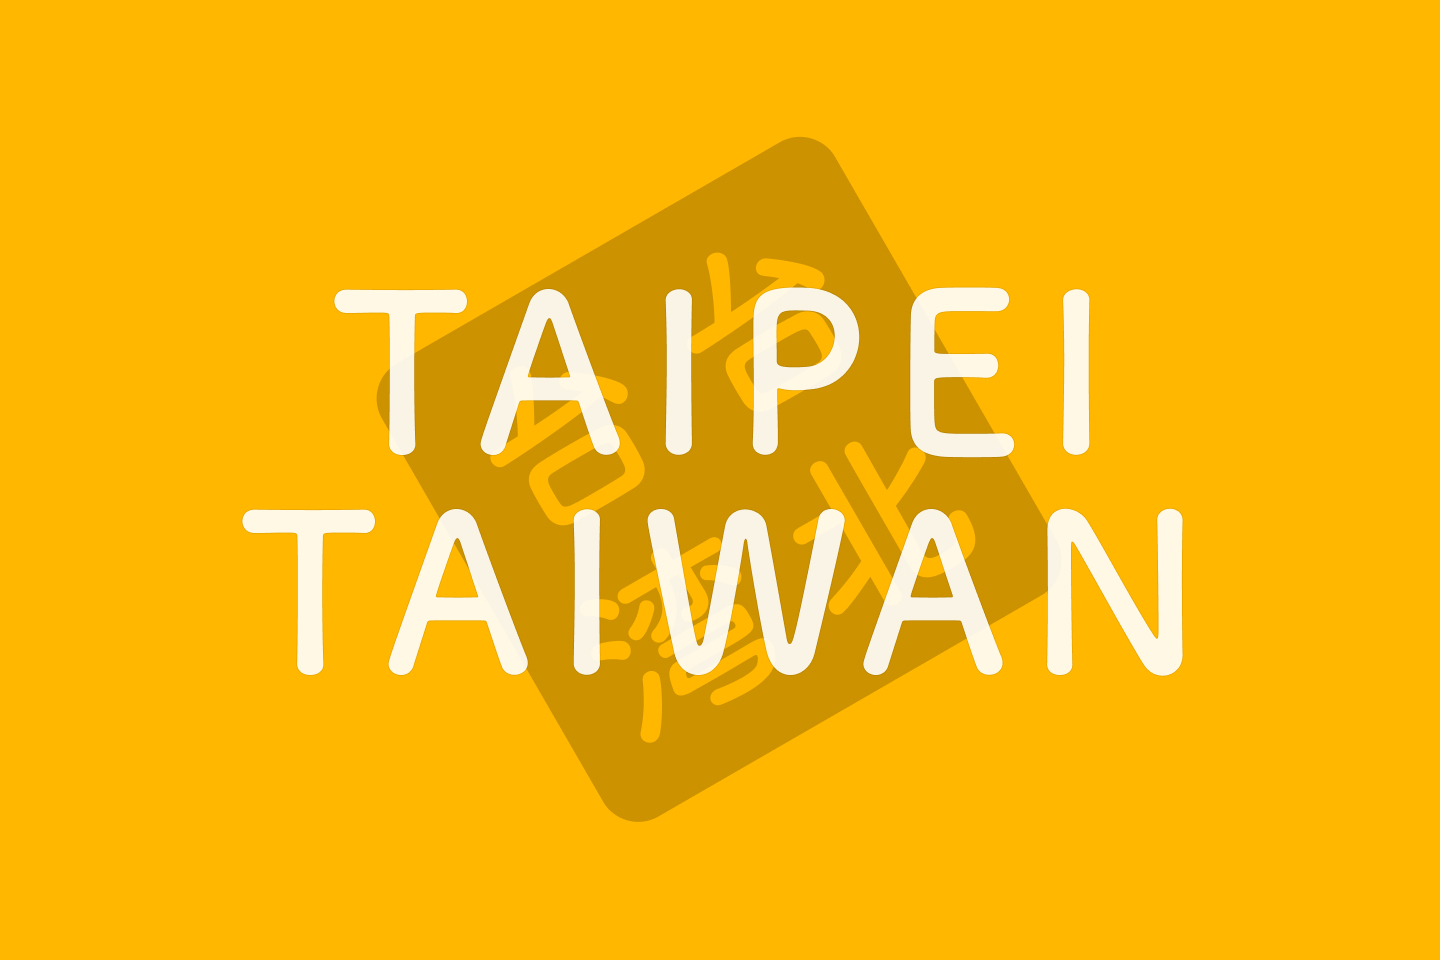 Being in Taipei as the pandemic hit